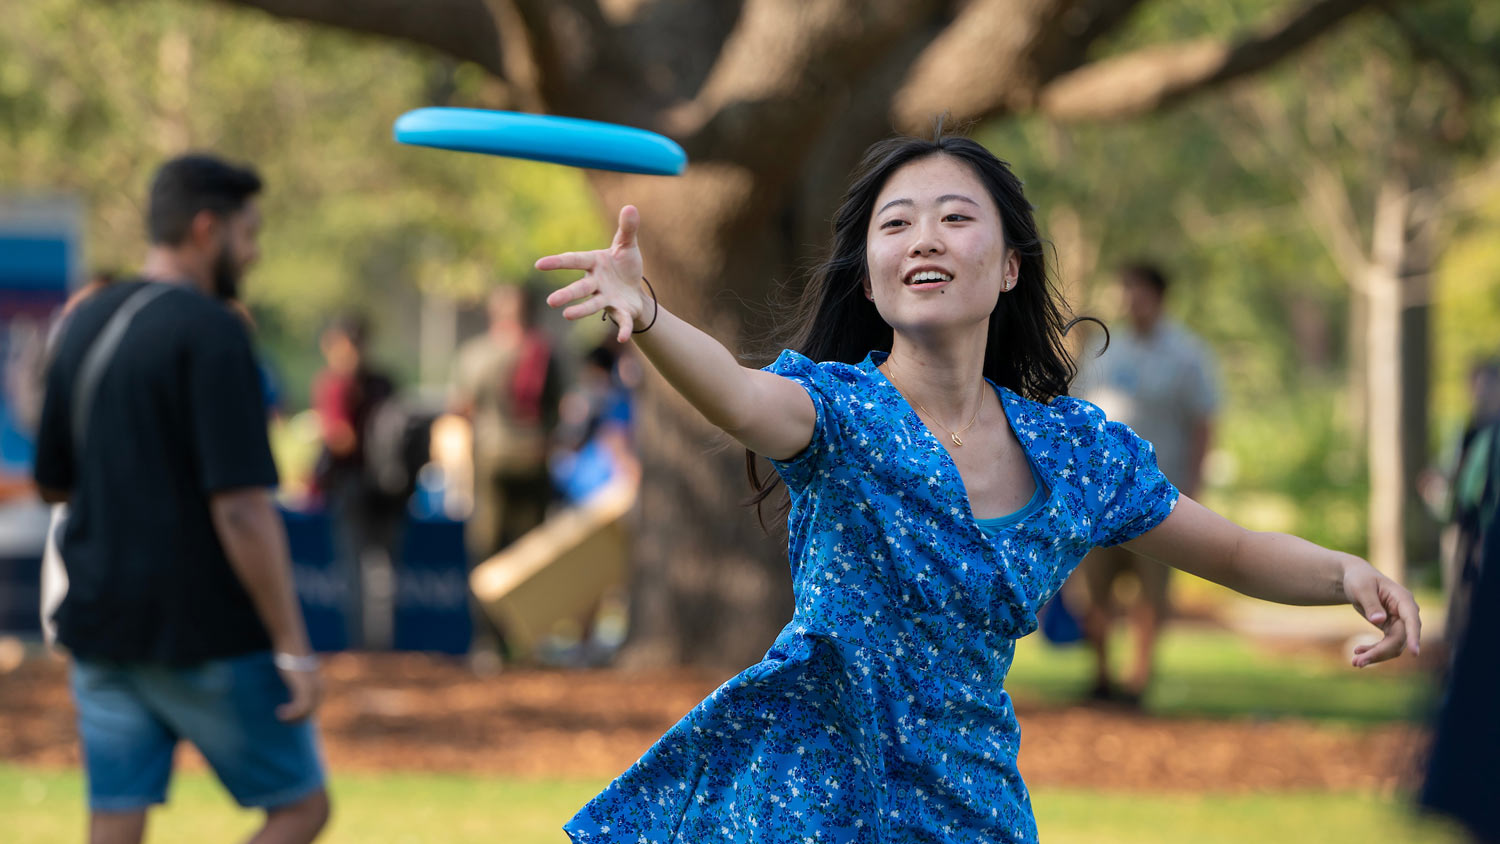 A student tosses a frisbee while at an event in Aggie Park